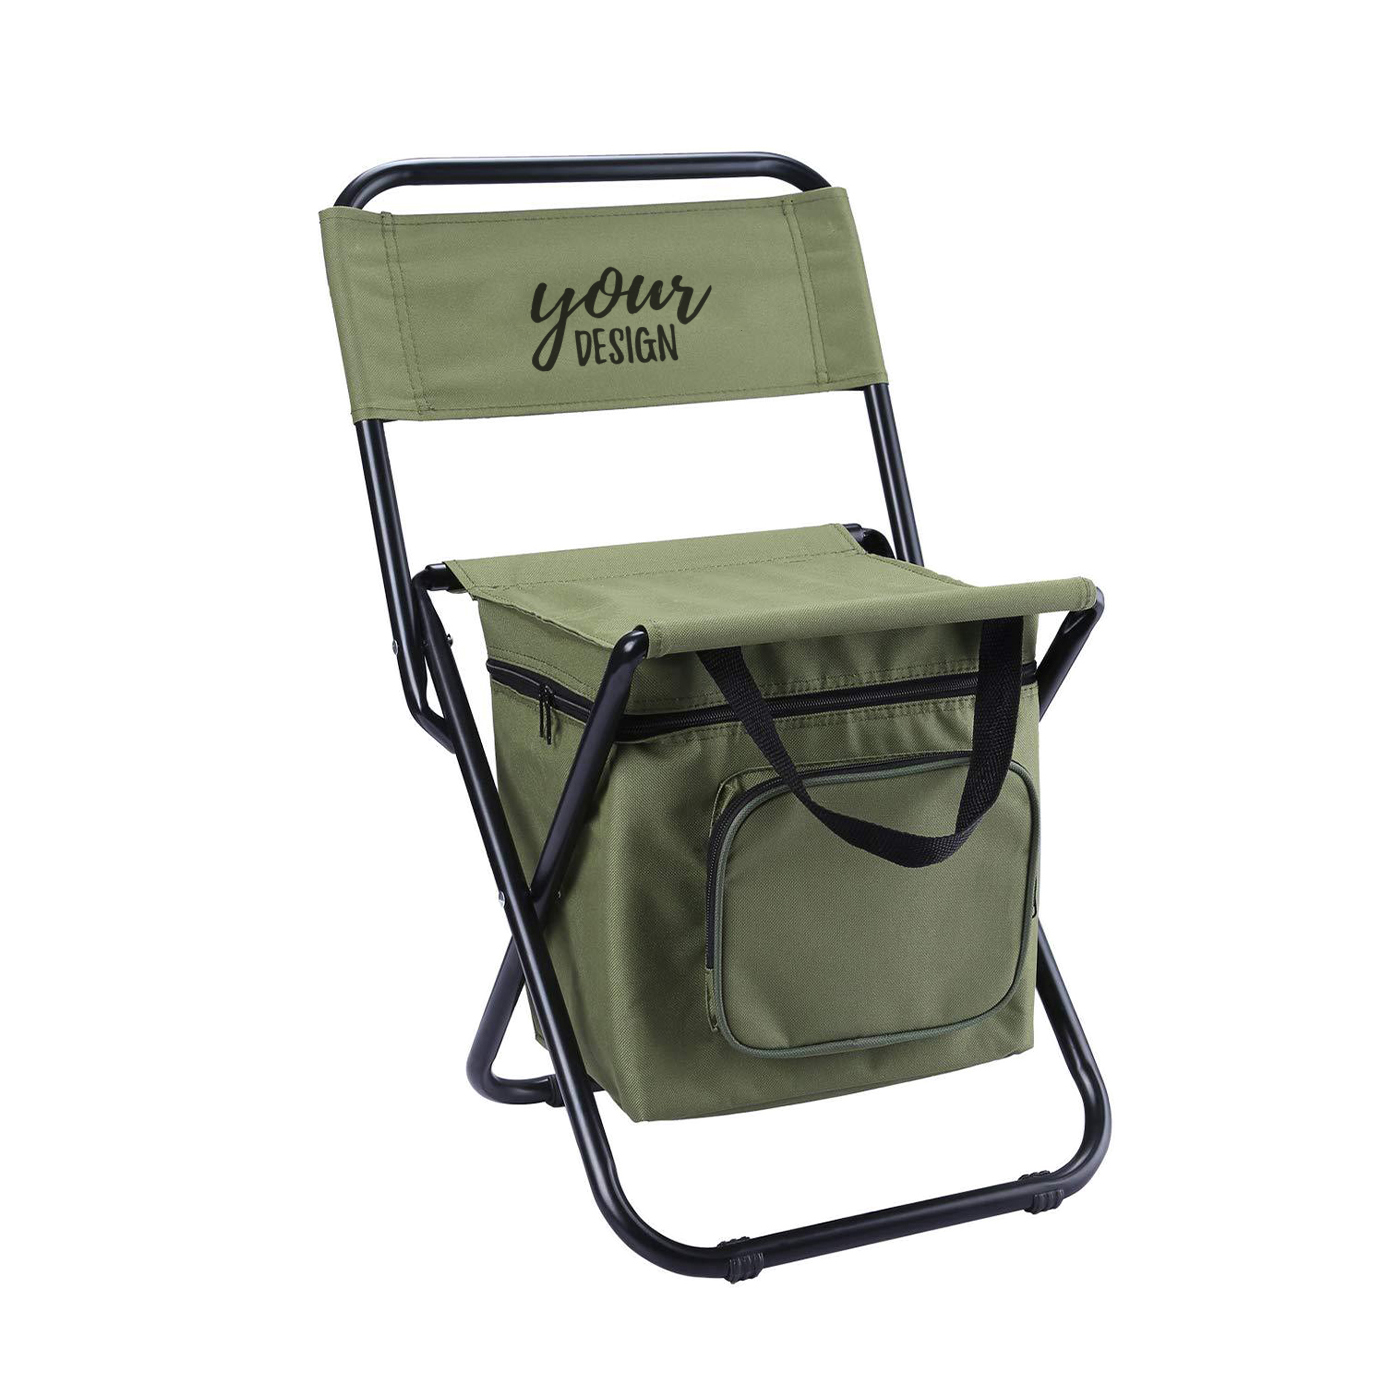 Folding Stool Chair With Cooler Bag1